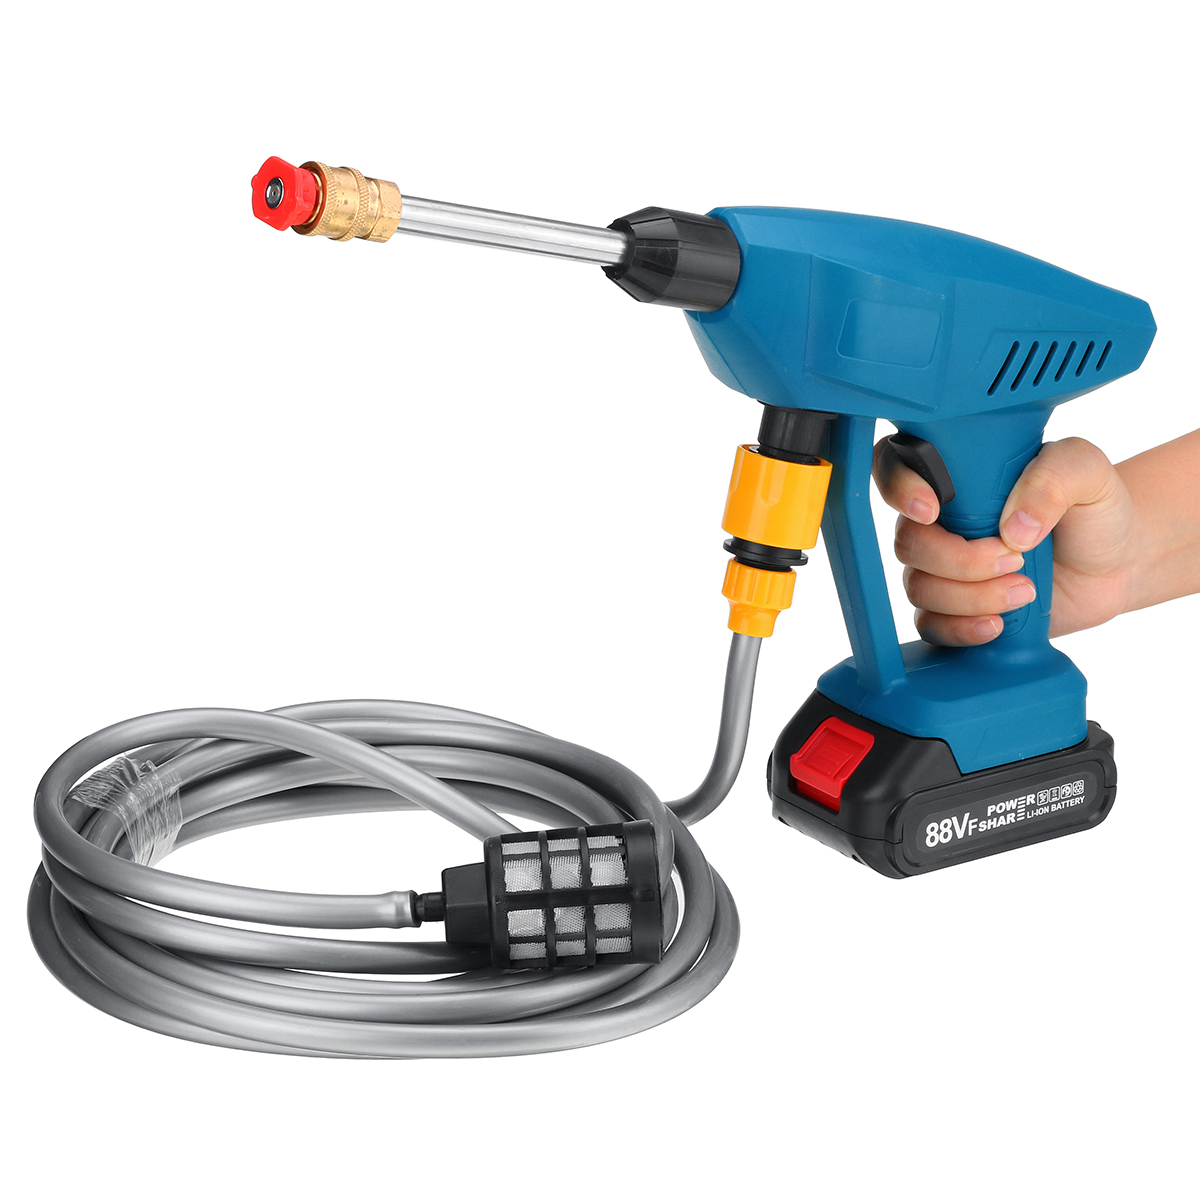 600W-Cordless-High-Pressure-Car-Power-Washer-Spray-Guns-Wand-Lance-Nozzle-Tips-Hose-Kit-W-Battery-Fo-1872419-8